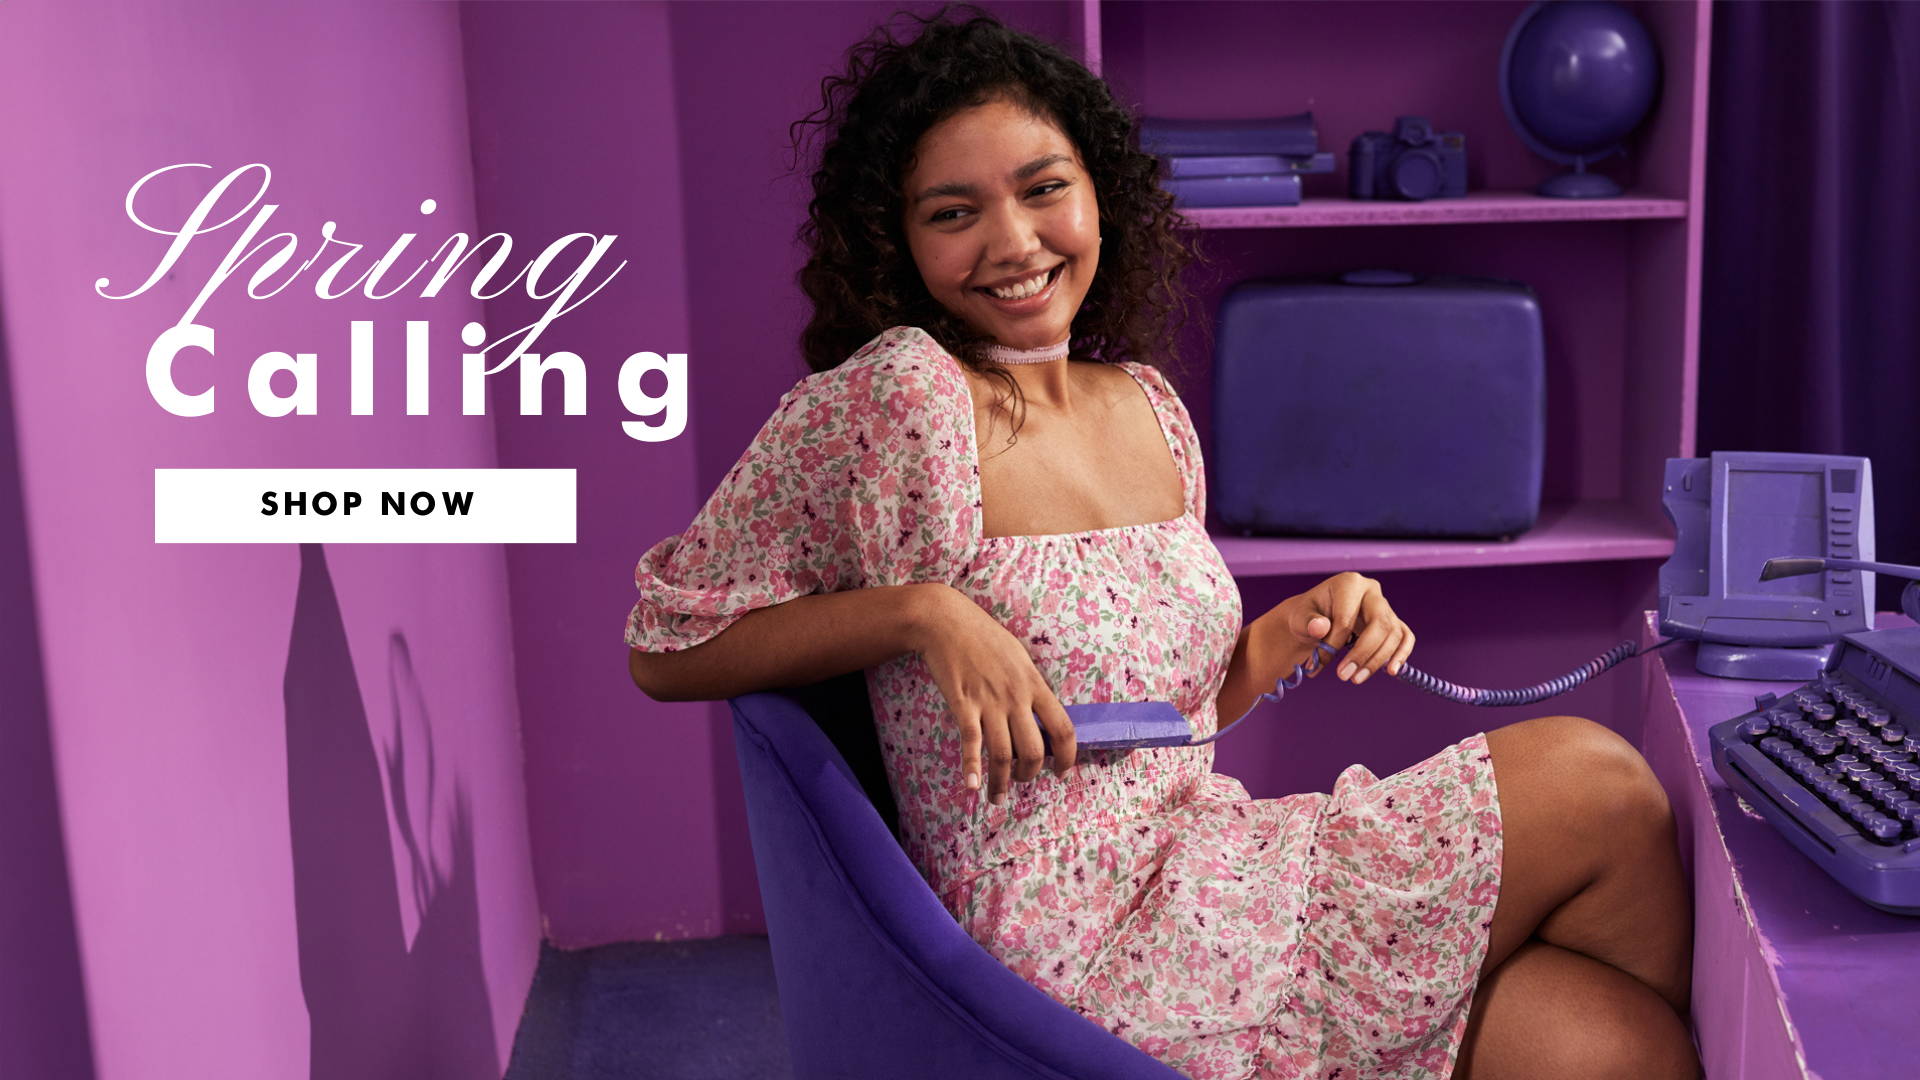 Spring is calling, pink and green floral dress with a pink choker, girl answering phone in purple room.